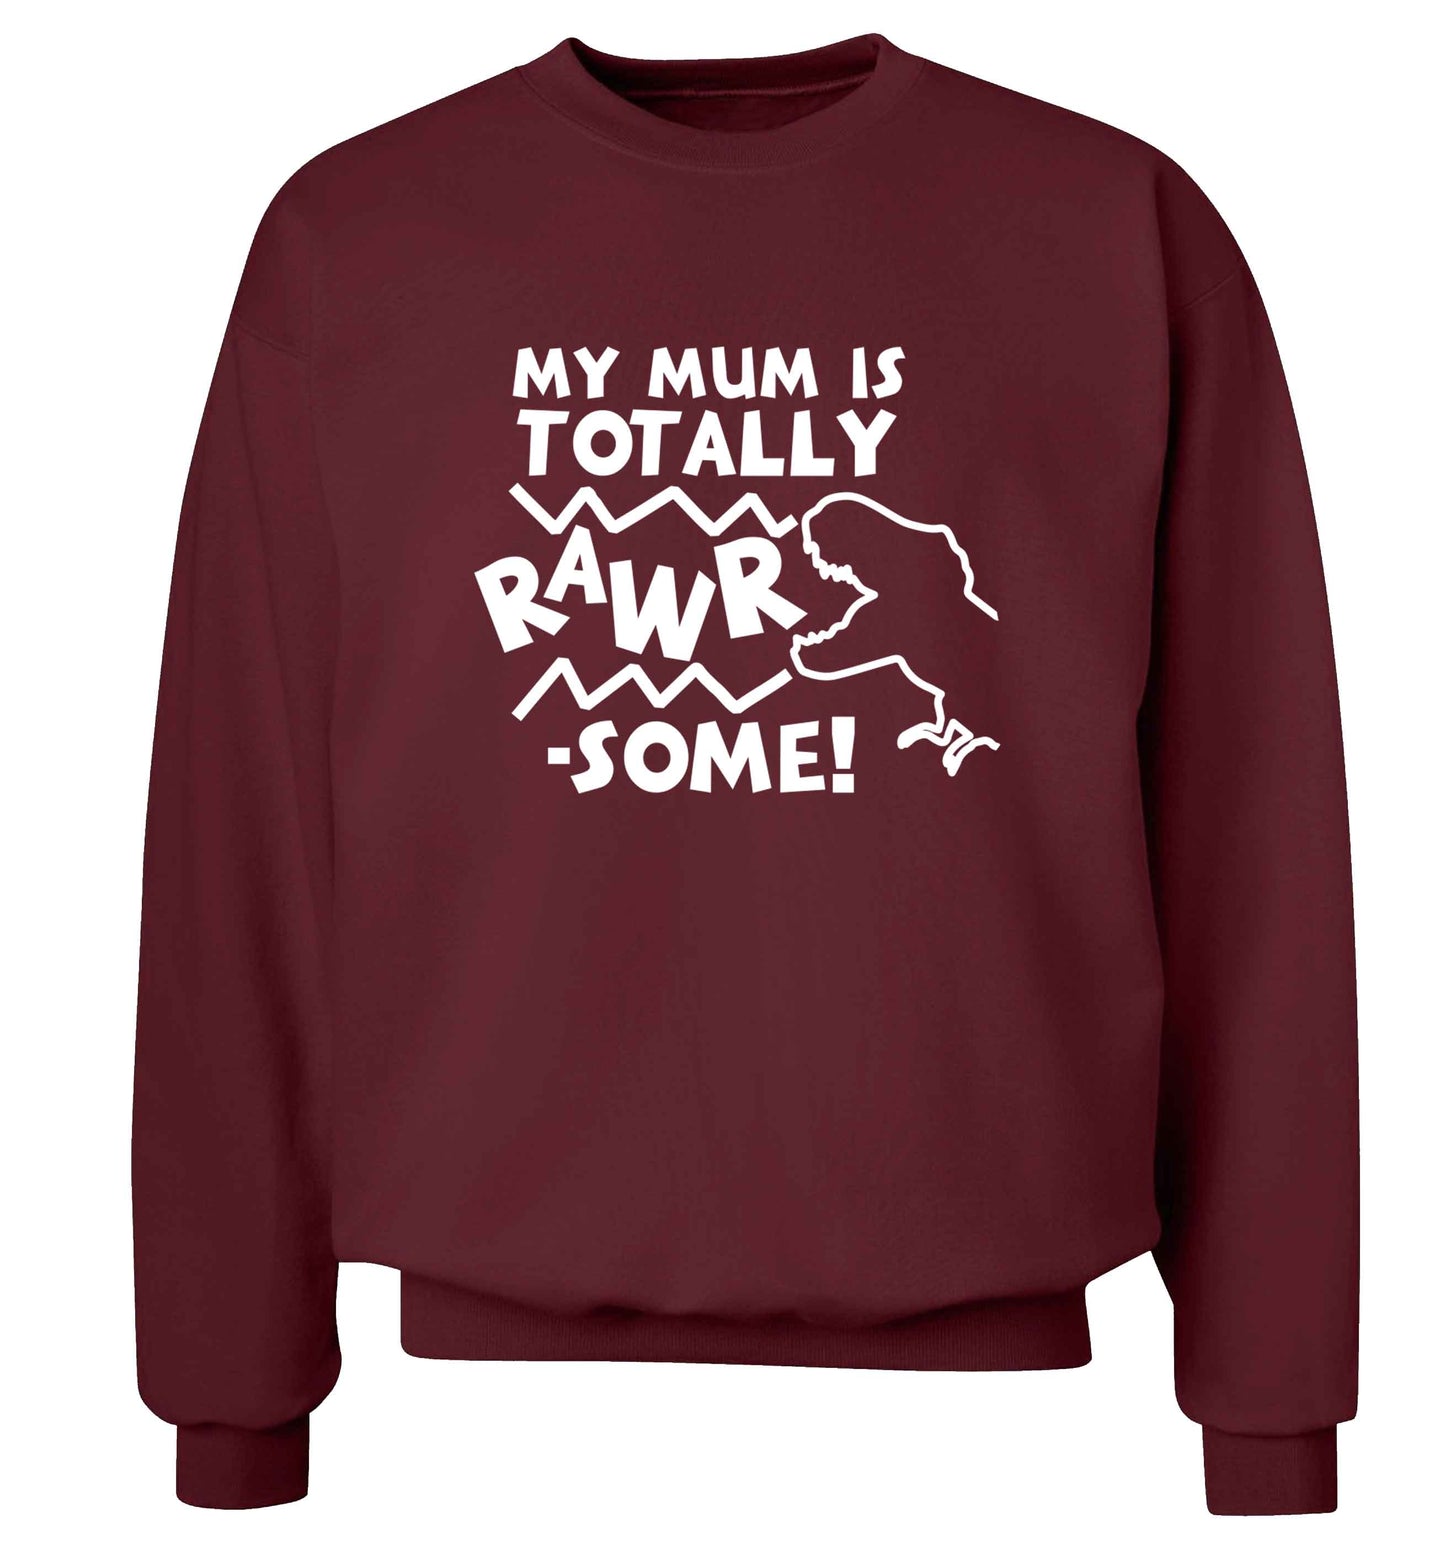 My mum is totally rawrsome adult's unisex maroon sweater 2XL